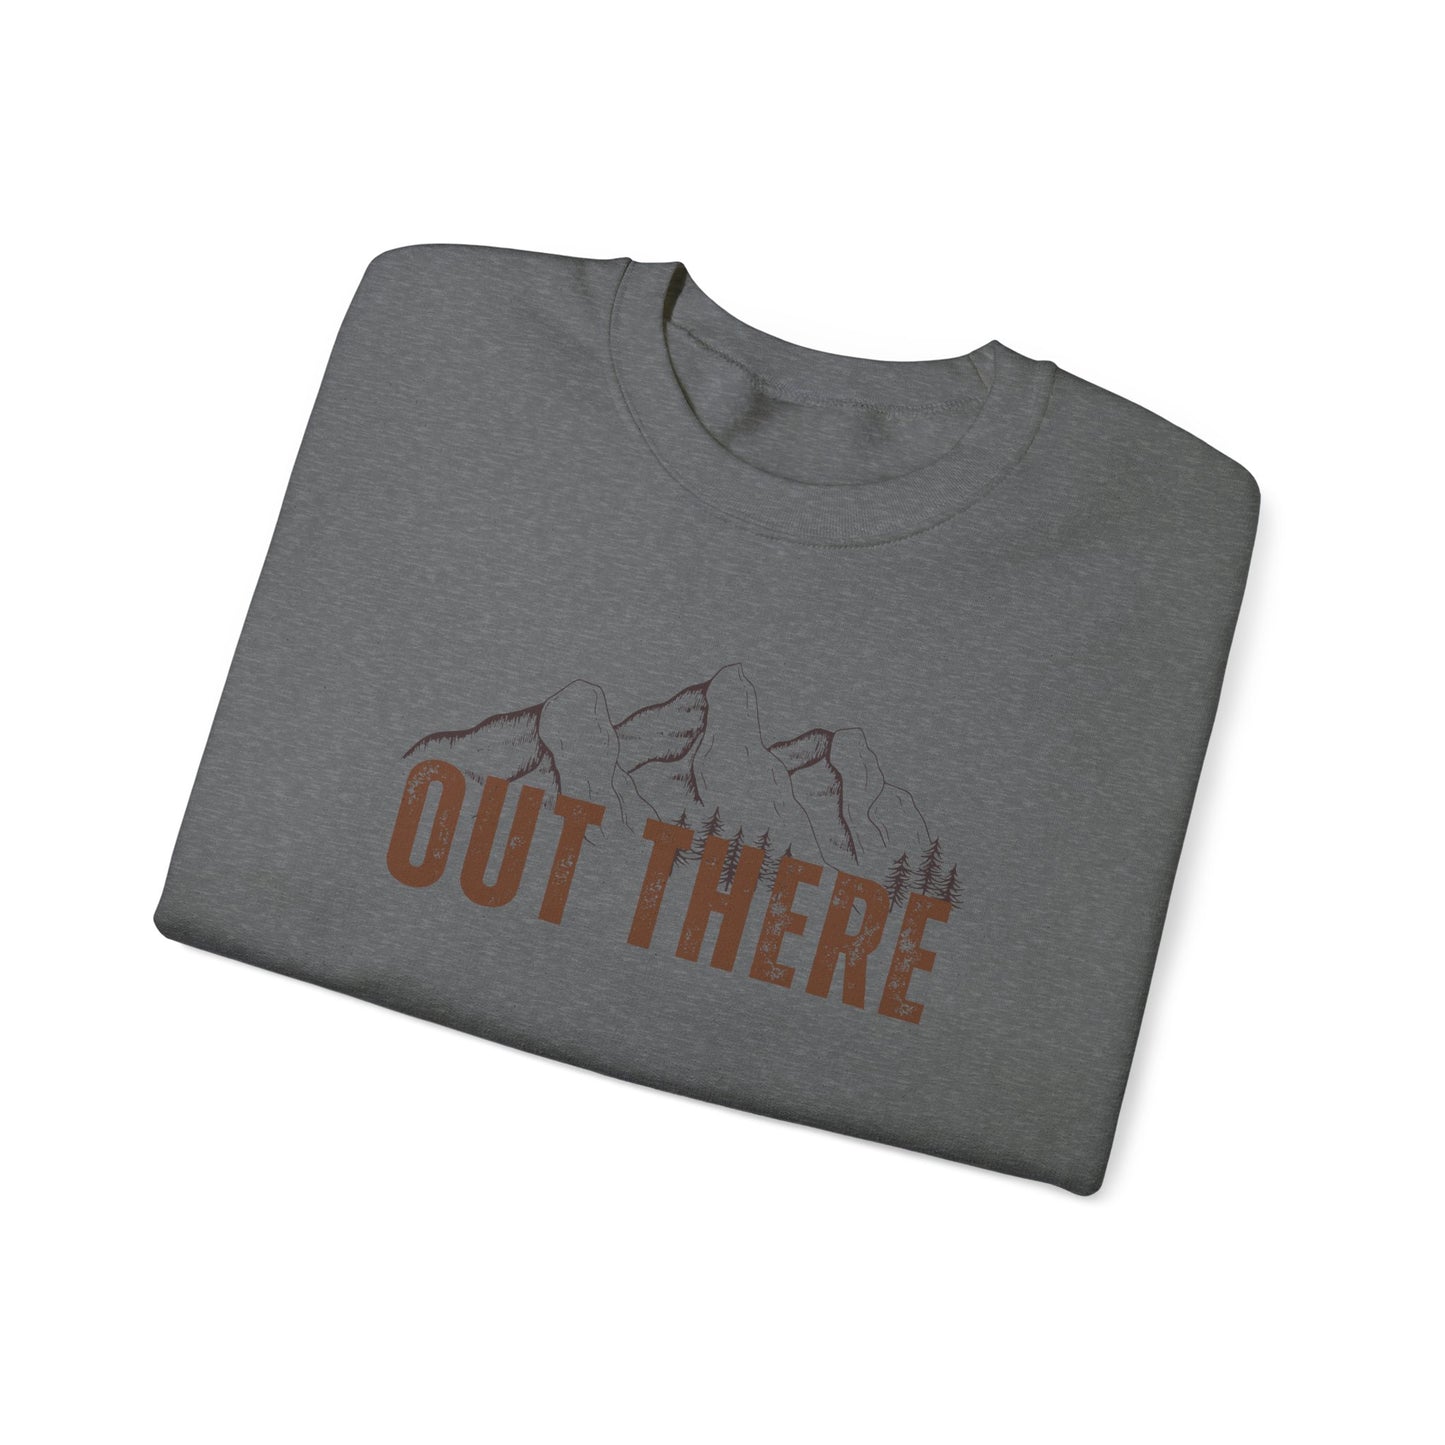 Out There Mountain Crewneck Sweatshirt